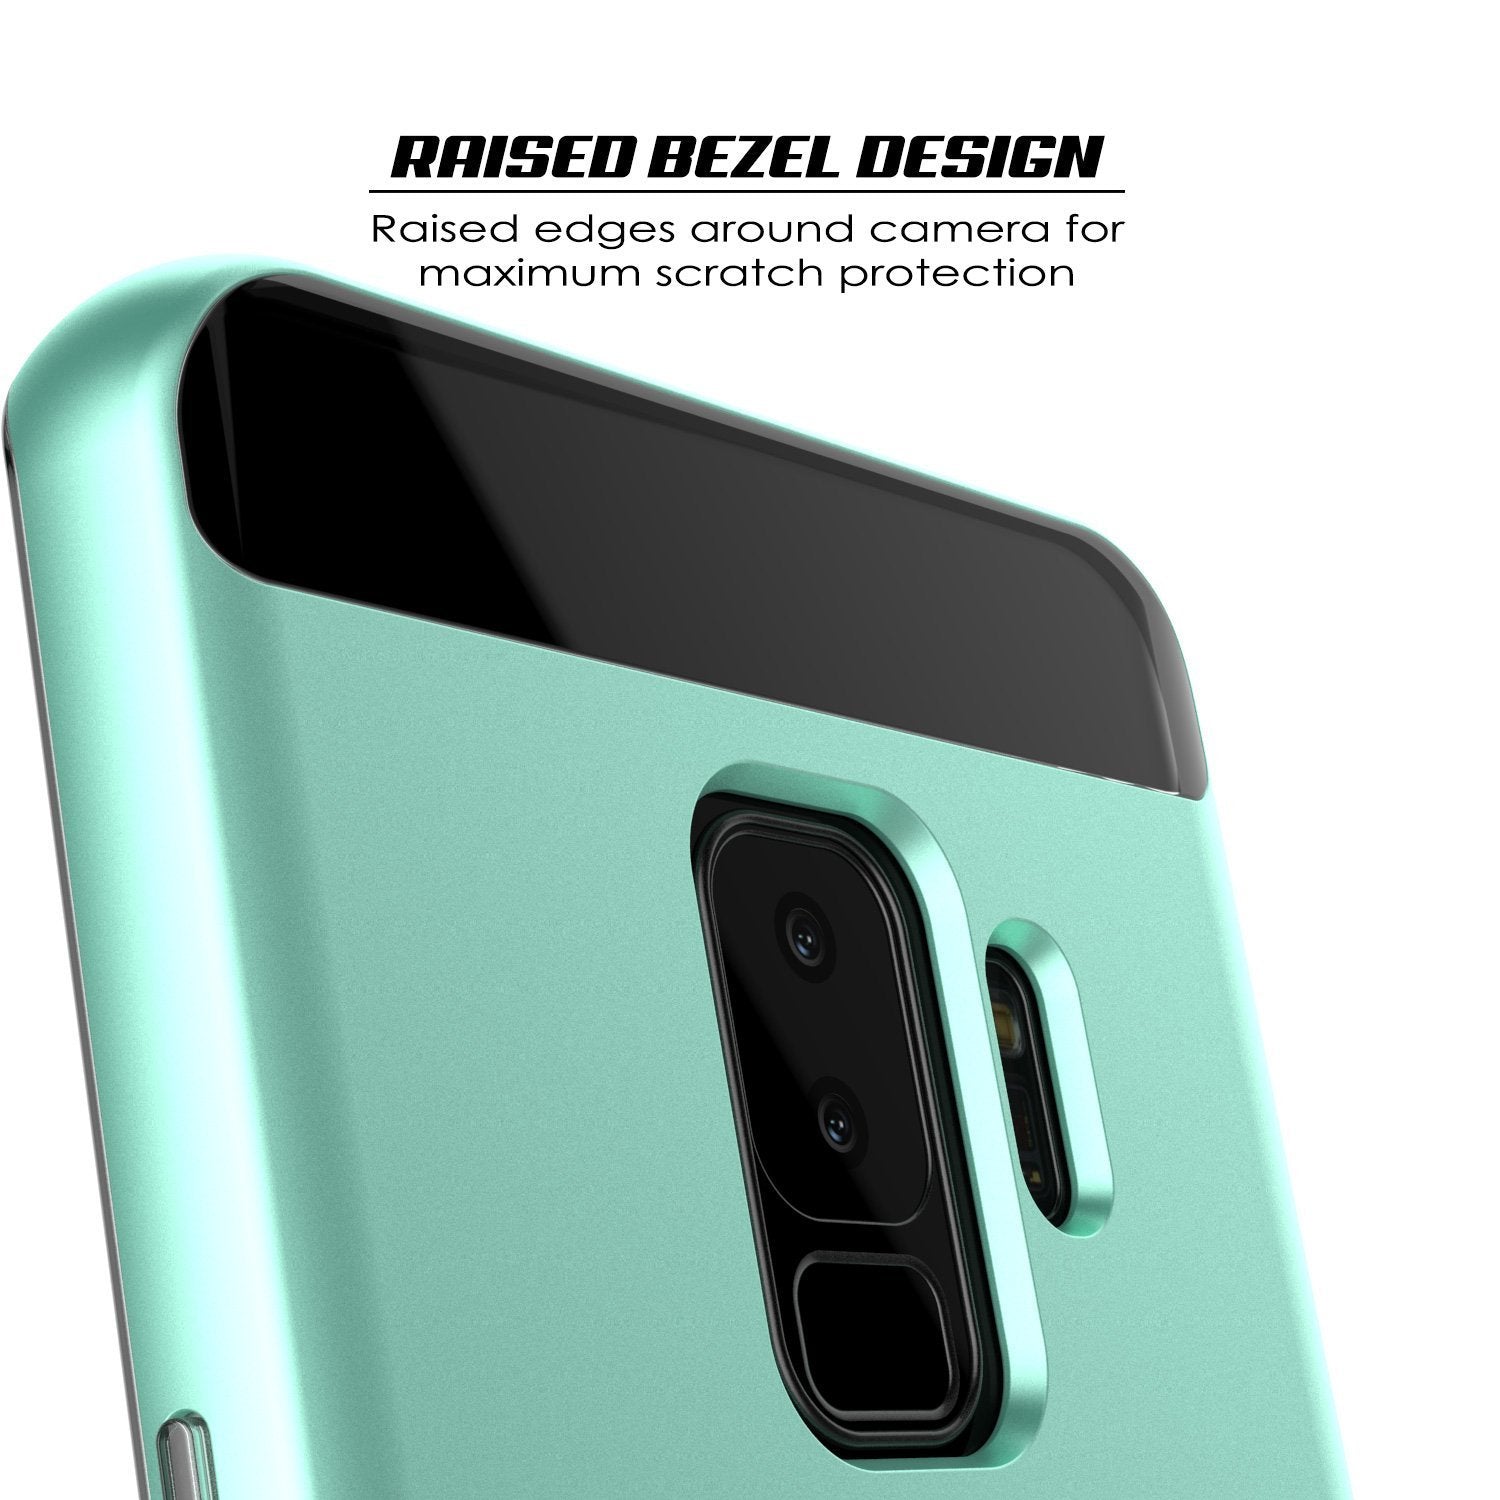 Galaxy S9+ Plus Case, PUNKcase [LUCID 3.0 Series] [Slim Fit] [Clear Back] Armor Cover w/ Integrated Kickstand, Anti-Shock System & PUNKSHIELD Screen Protector for Samsung Galaxy S9+ Plus [Teal]